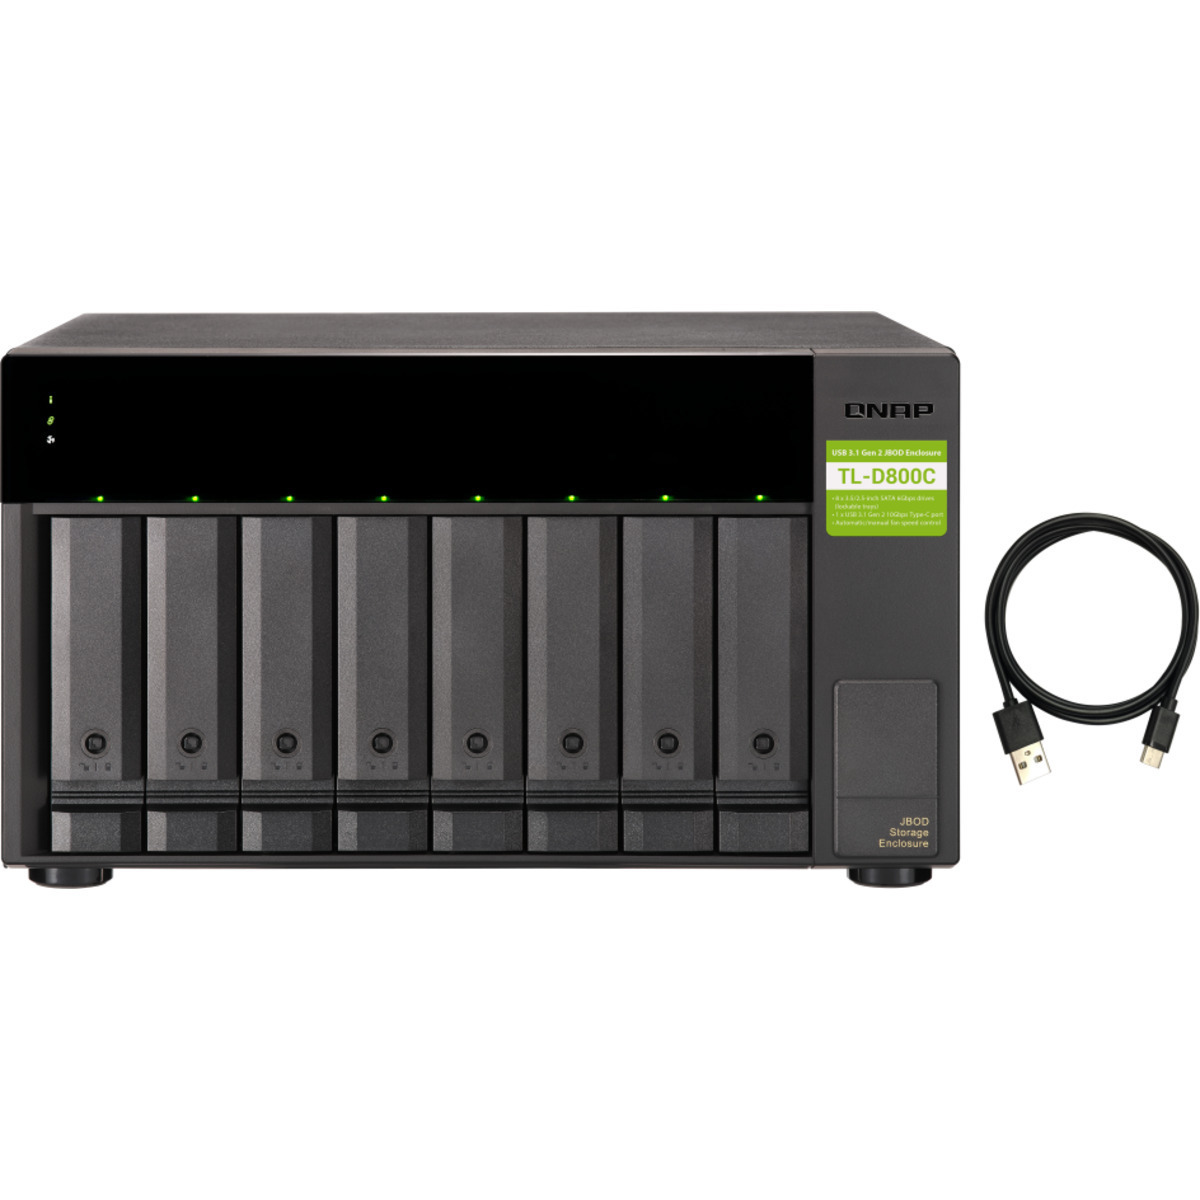 QNAP TL-D800C External Expansion Drive 84tb 8-Bay Desktop Multimedia / Power User / Business Expansion Enclosure 6x14tb Seagate IronWolf Pro ST14000NT001 3.5 7200rpm SATA 6Gb/s HDD NAS Class Drives Installed - Burn-In Tested TL-D800C External Expansion Drive